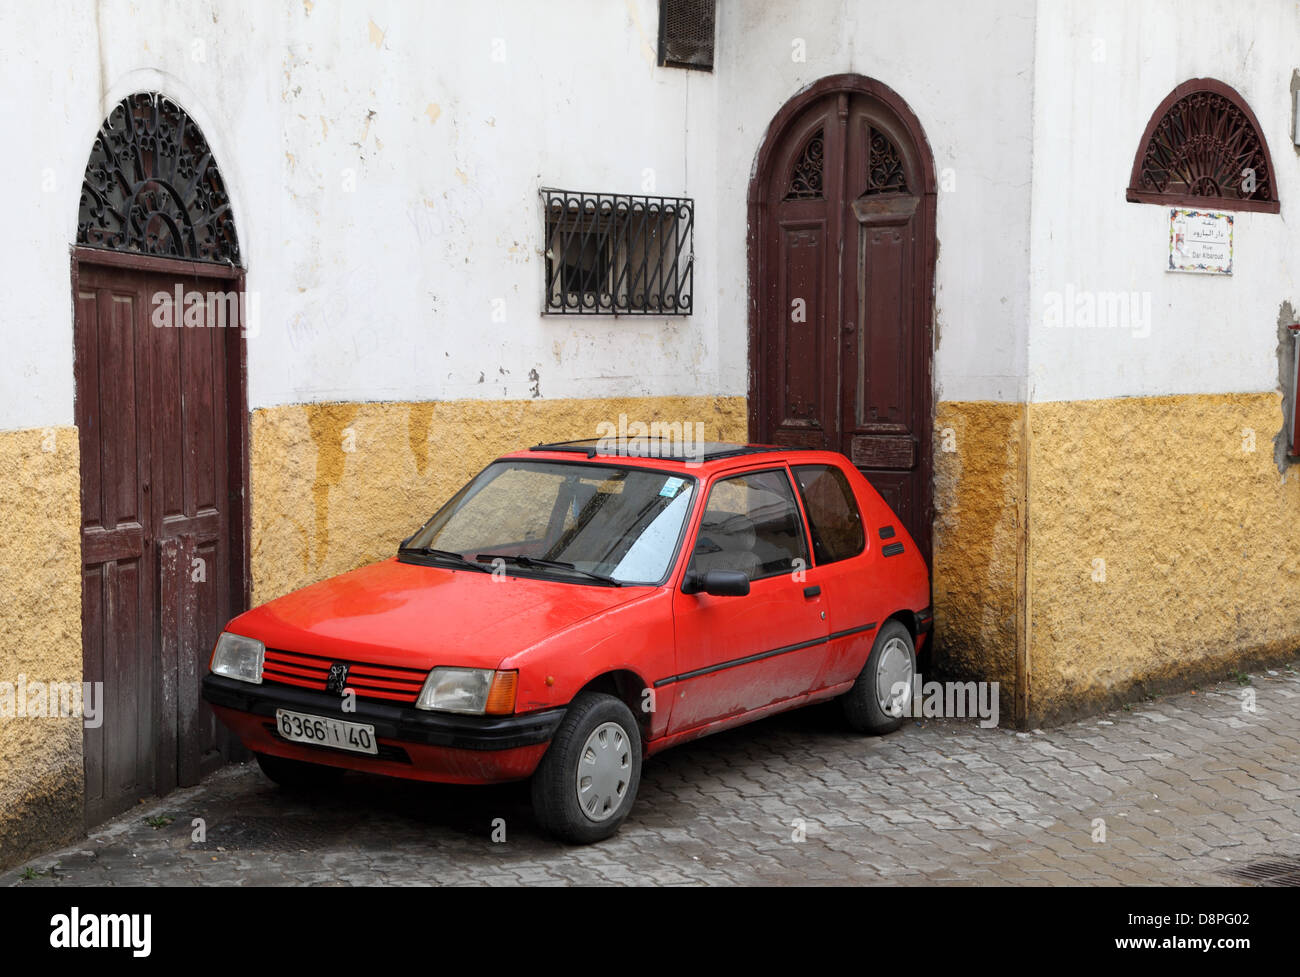 Old Peugeot 205 parked in a narrow street in Tanger, Morocco Stock Photo